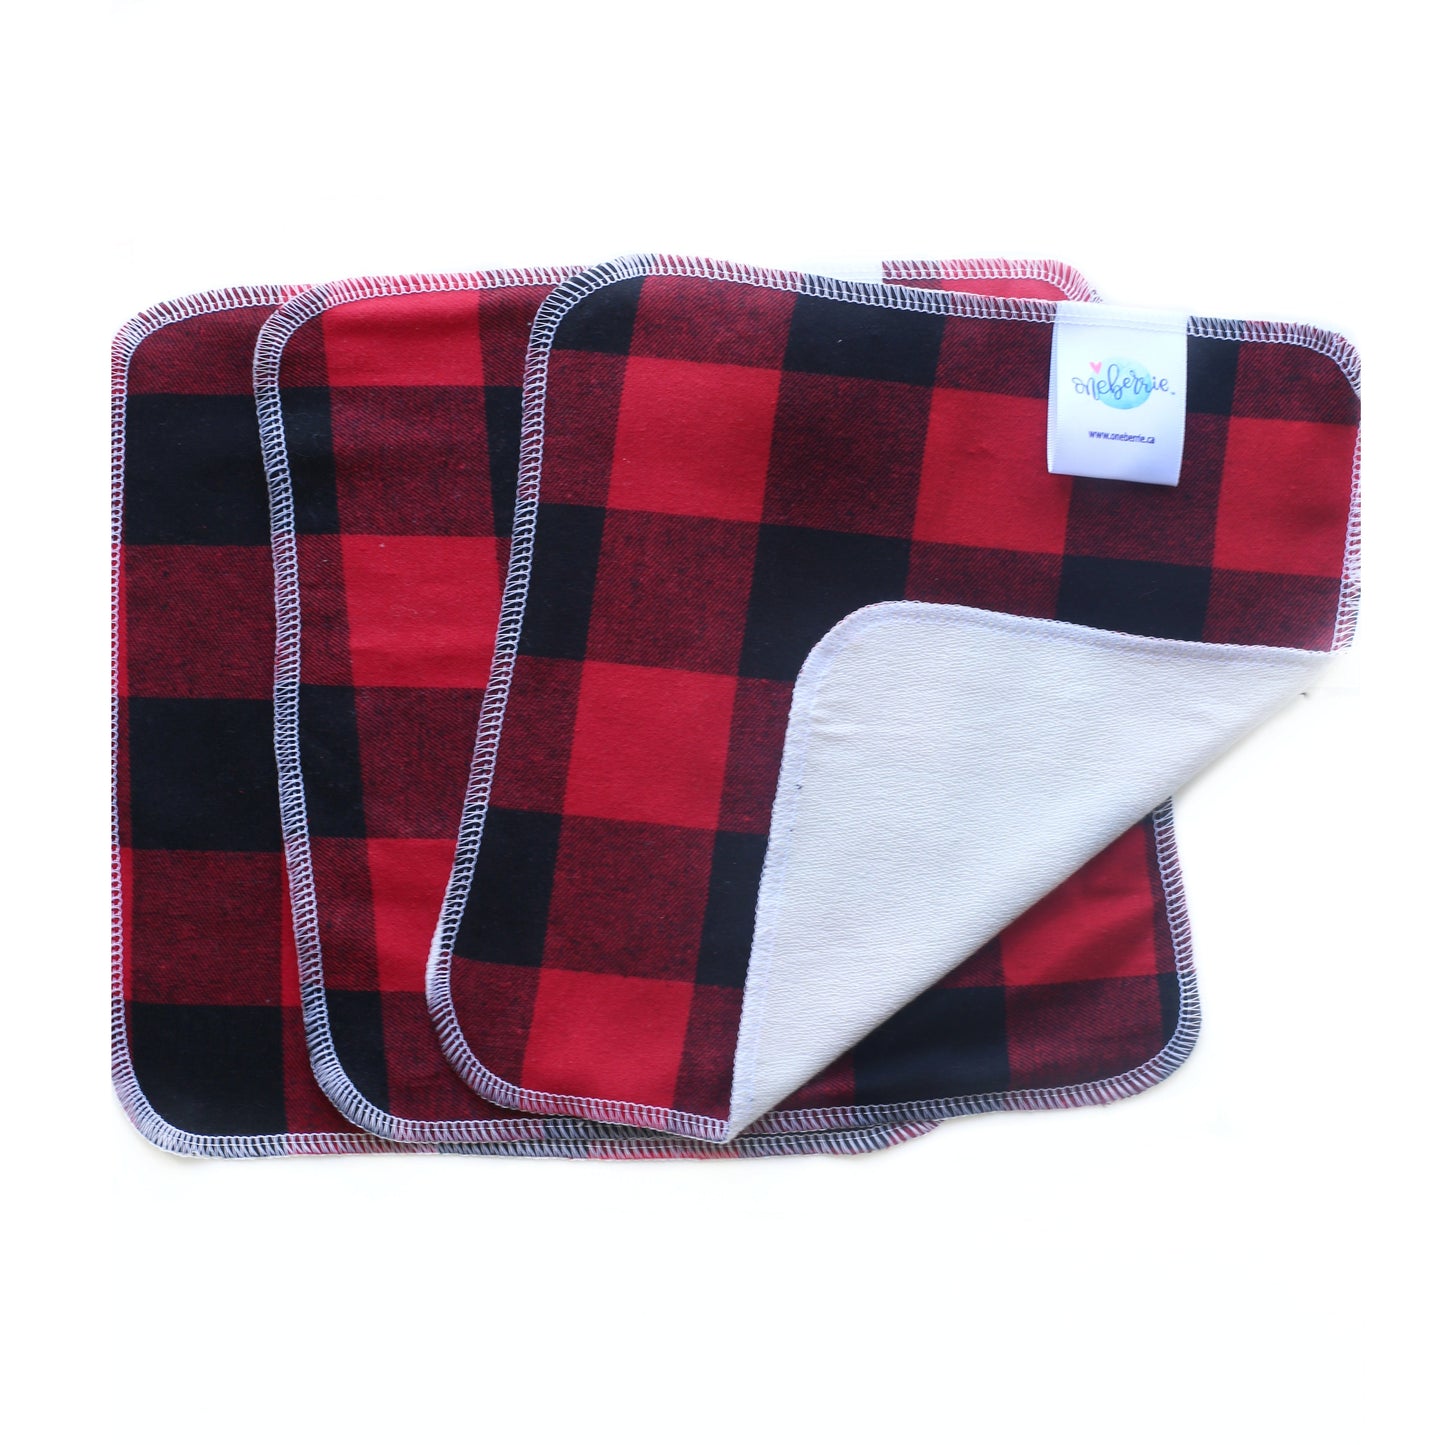 Washcloths - 3 pack Oneberrie Canada